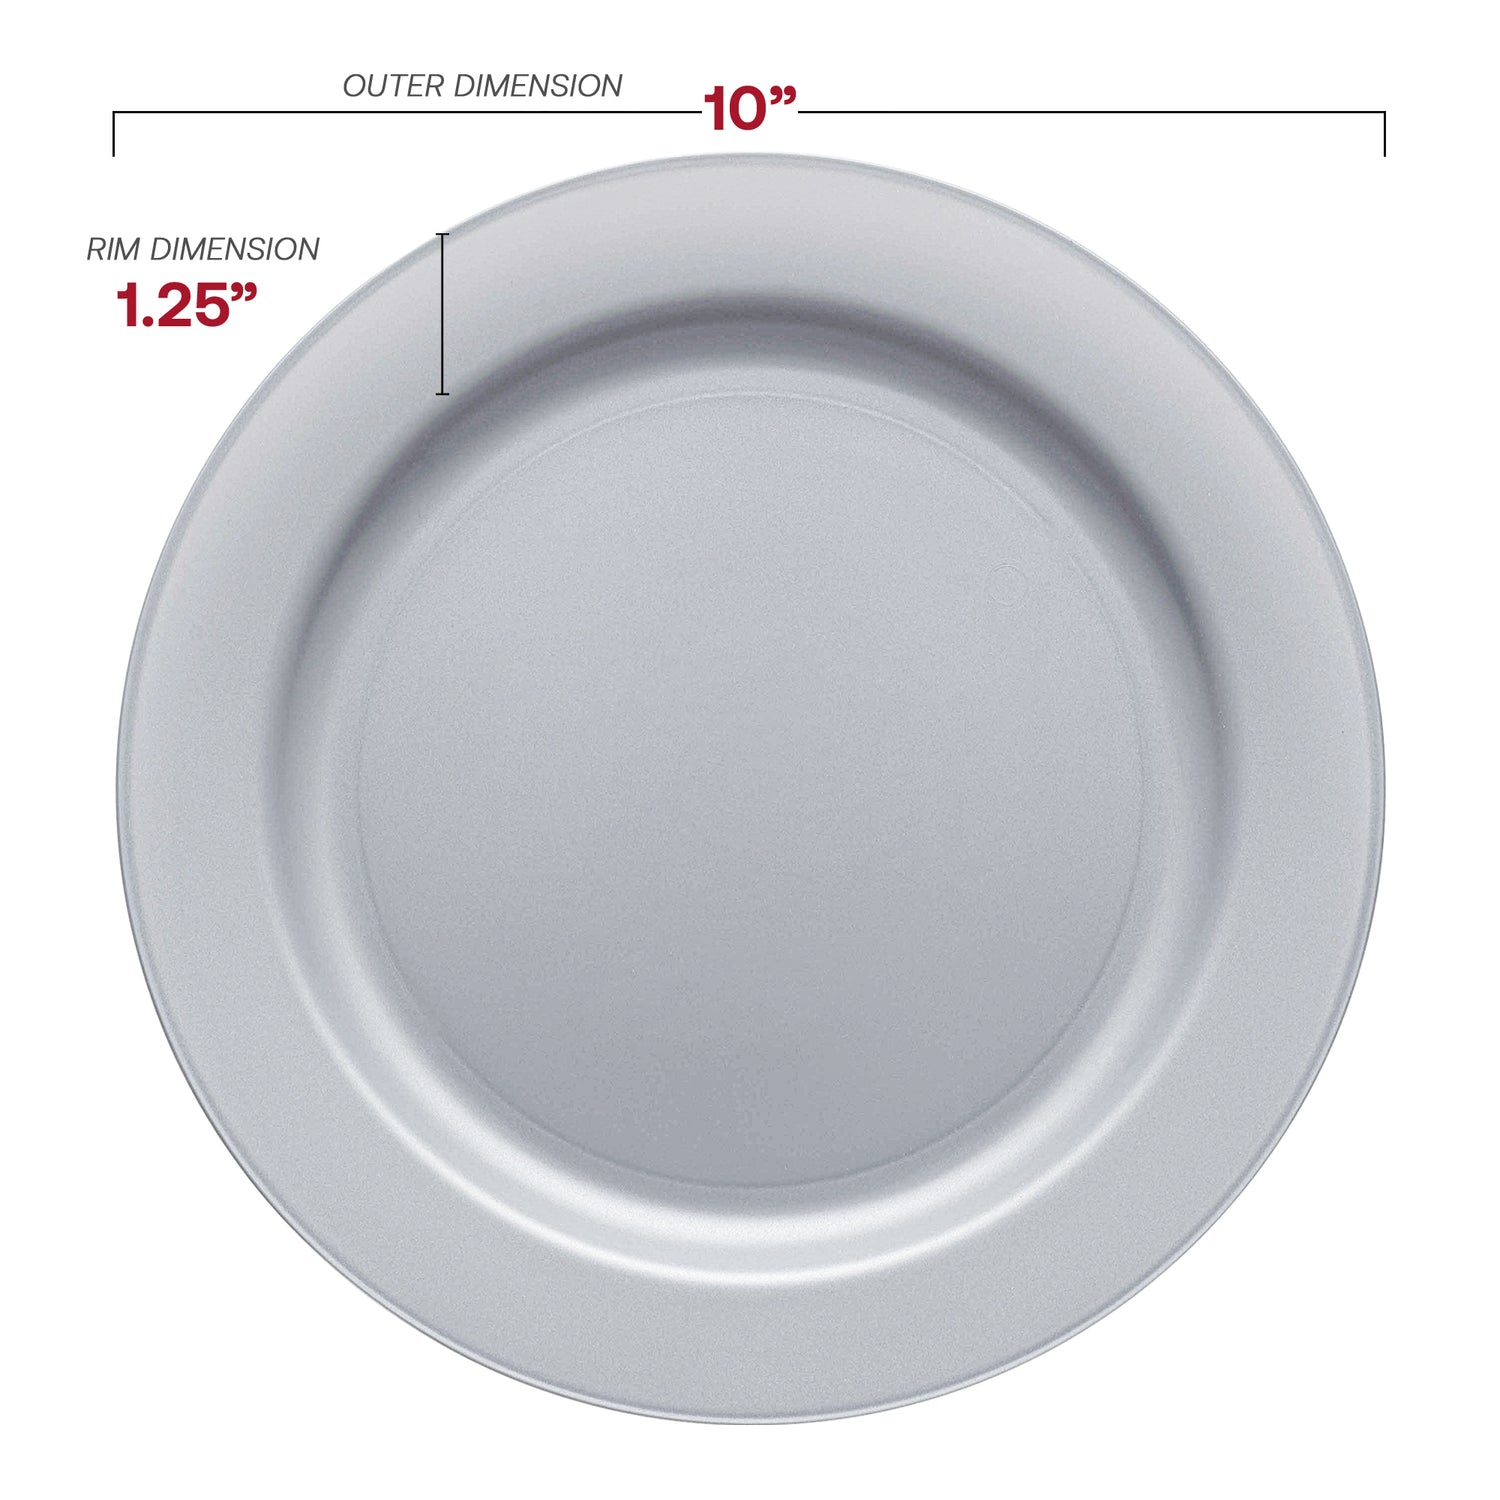 Matte Steel Gray Round Plastic Dinner Plates (10") Dimension | The Kaya Collection